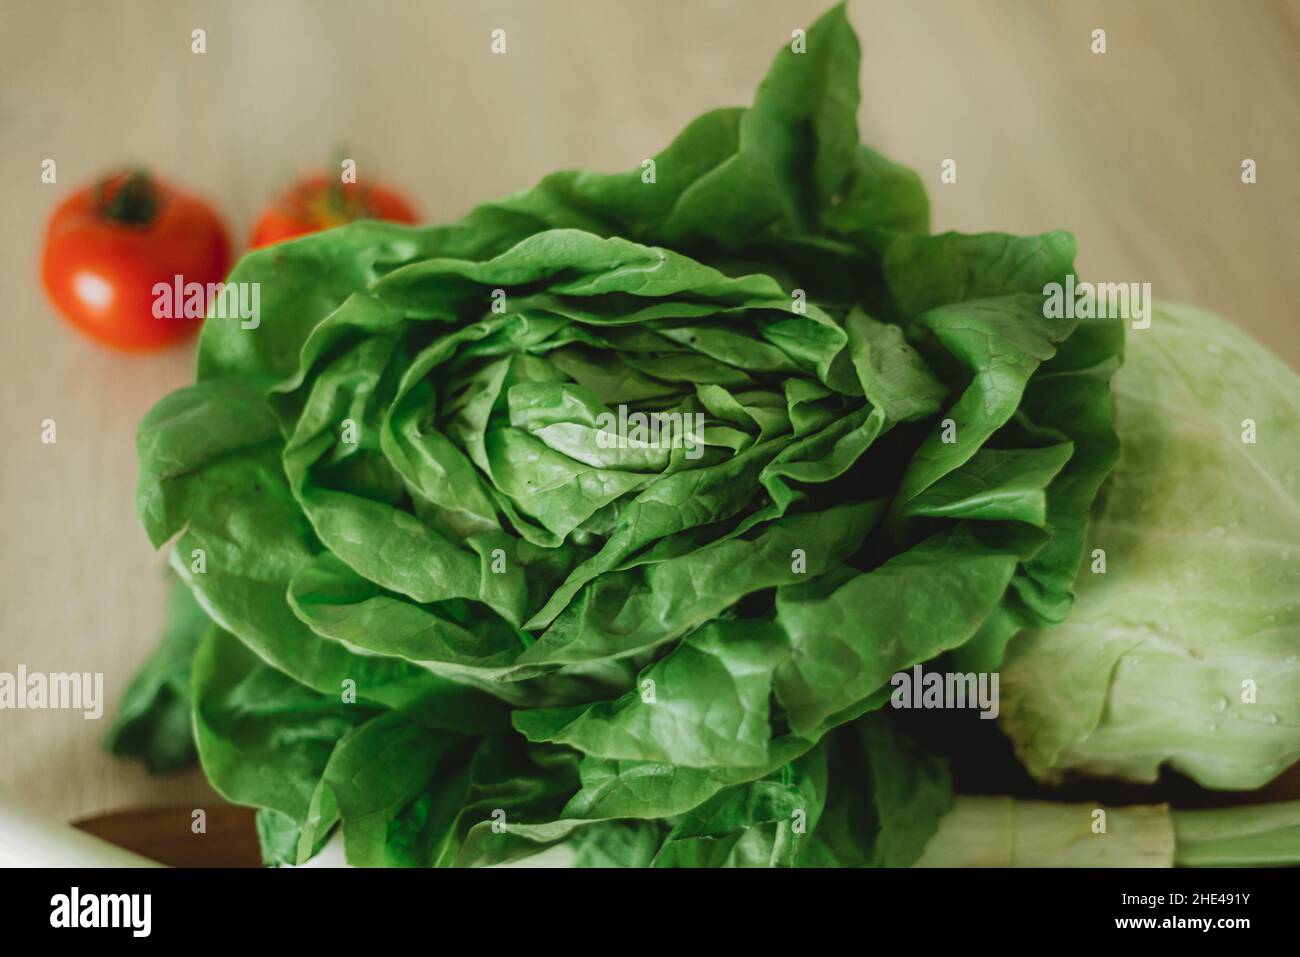 green organic salad and vegetables on the table Stock Photo